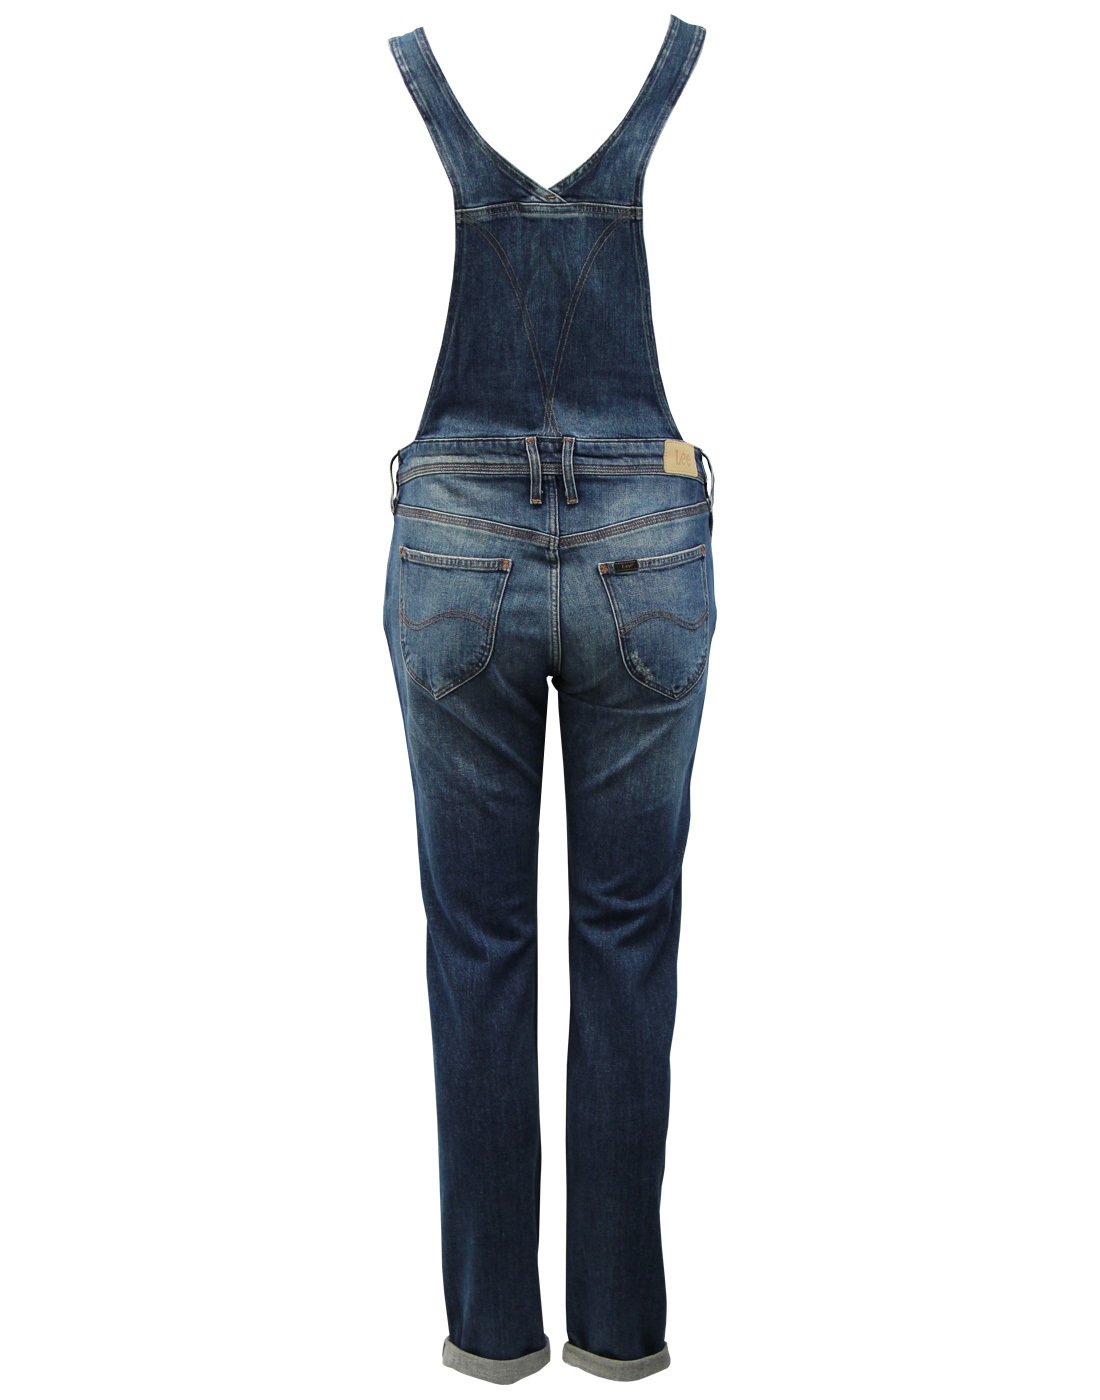 LEE Women's Retro 1970s Chelsea Aged Relaxed Bib Dungarees